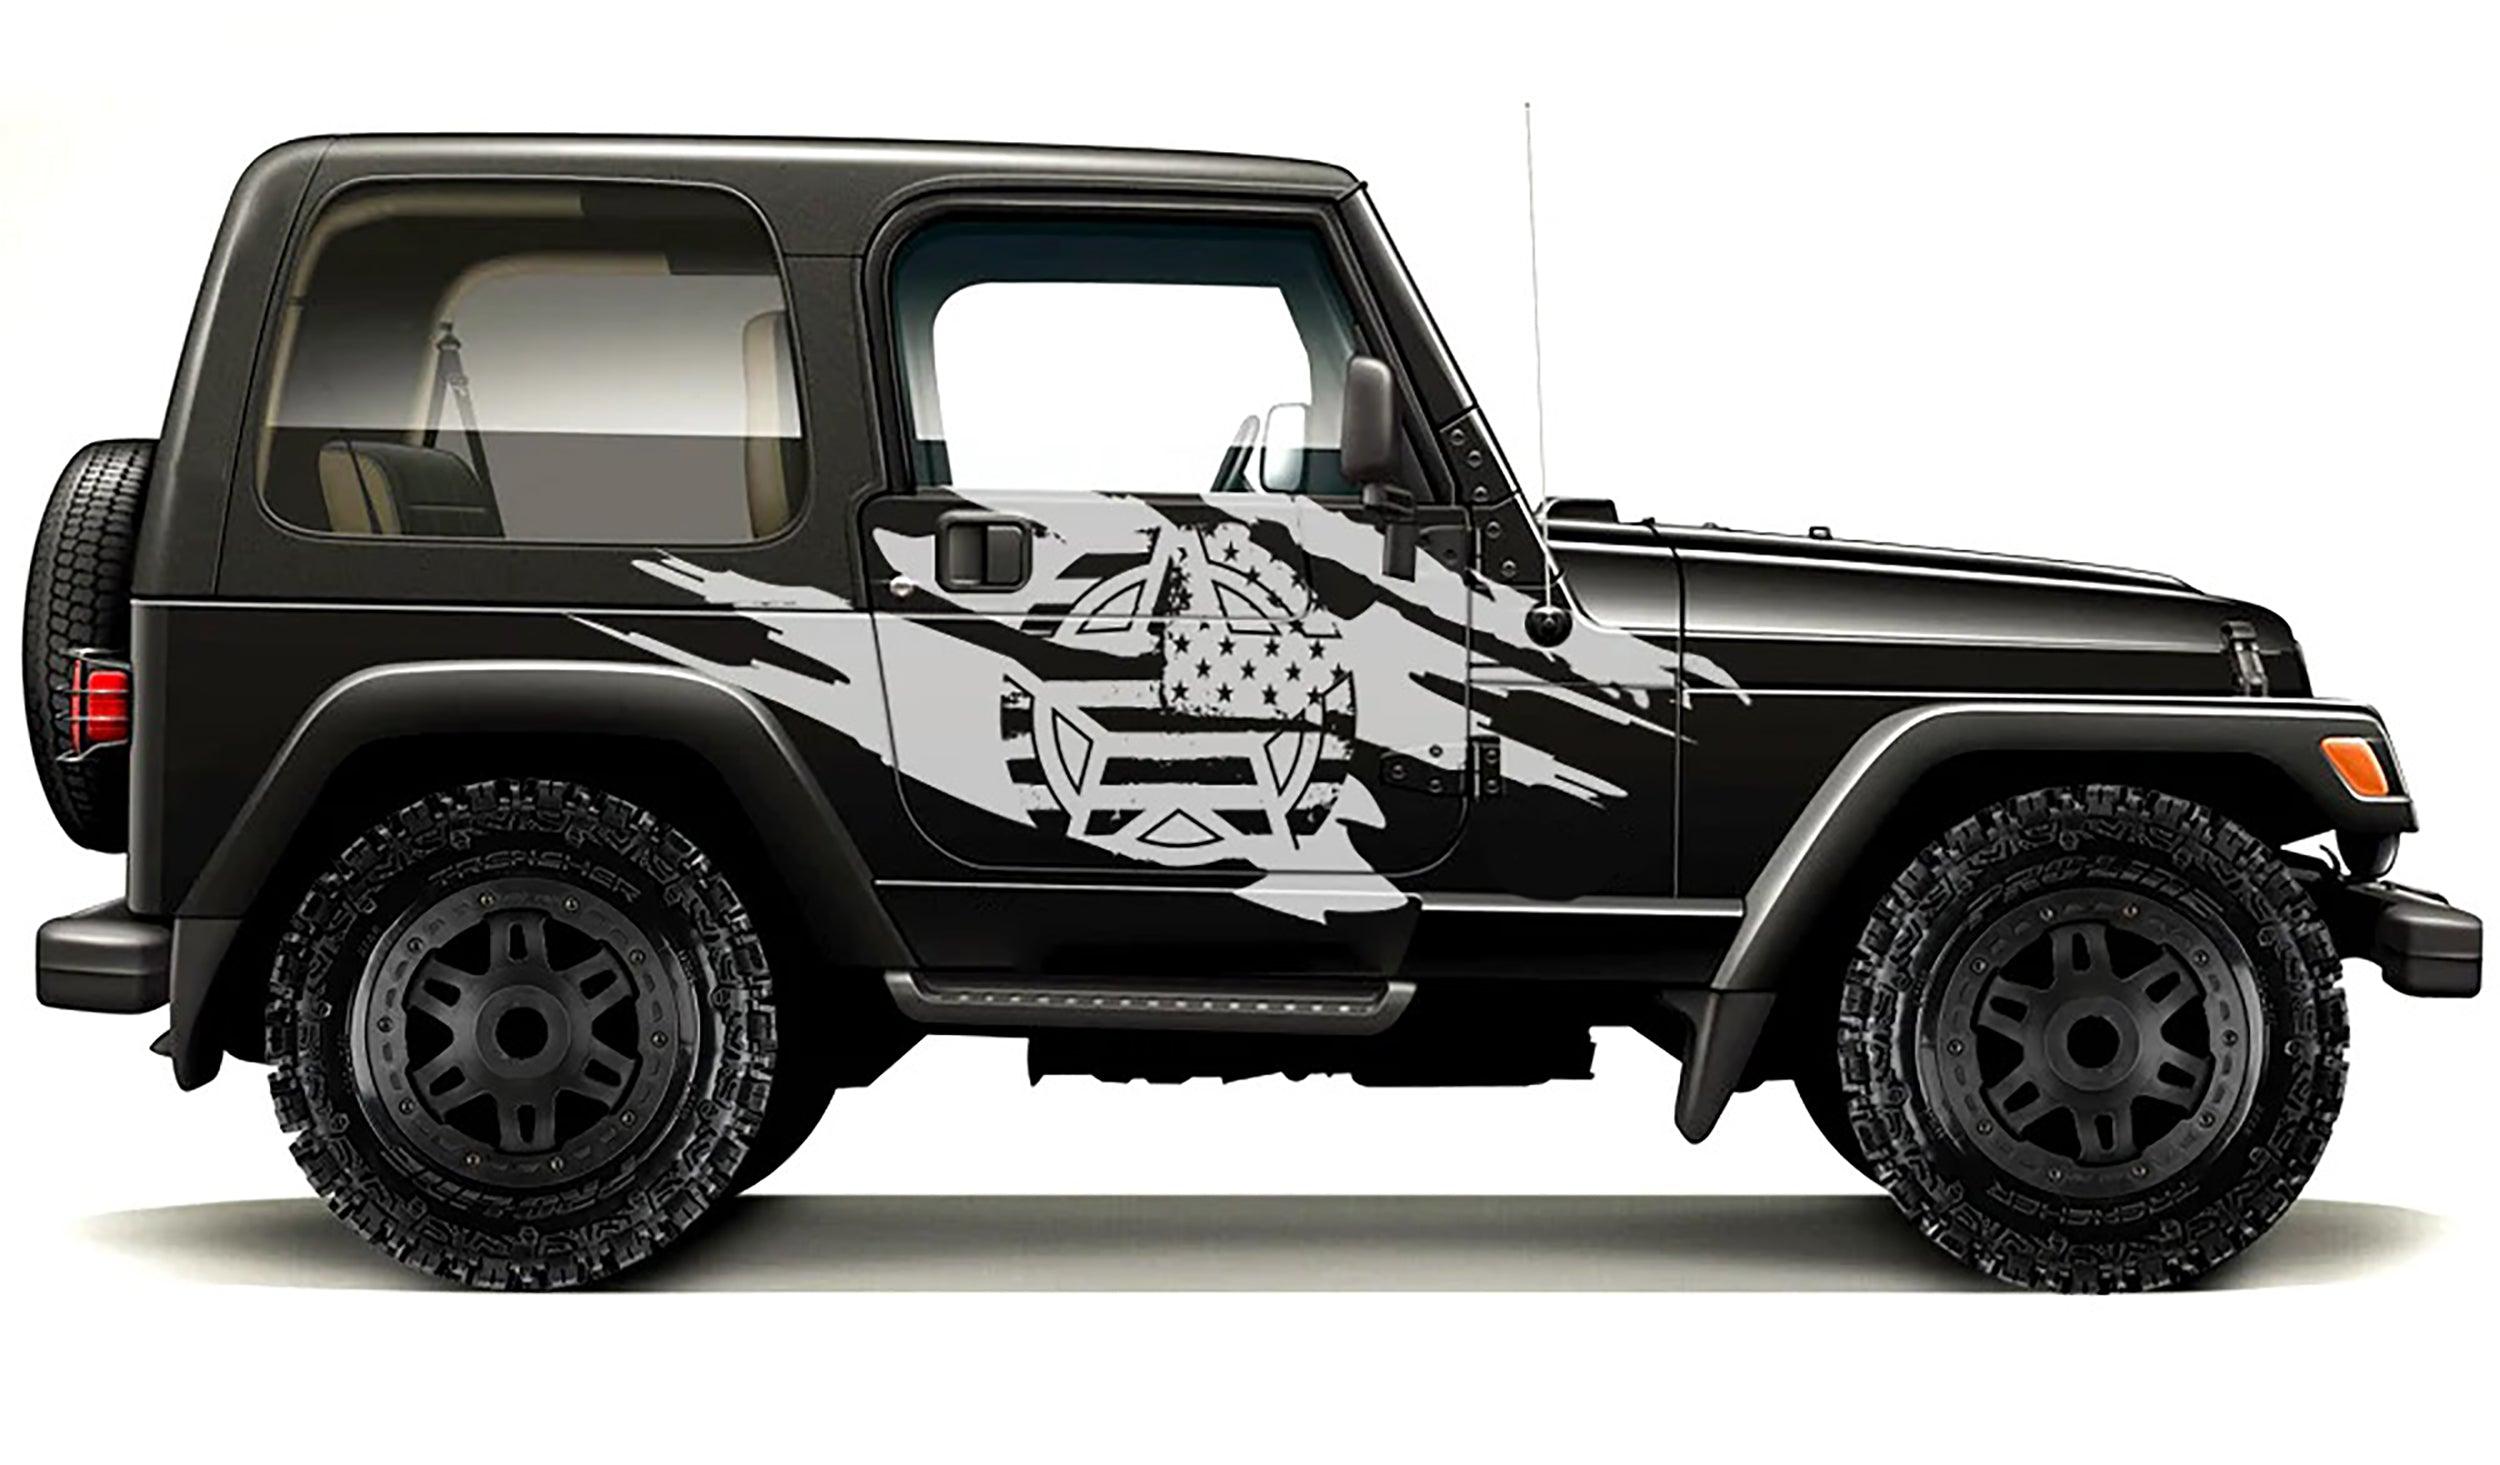 Jeep Wrangler (1999-2006) Custom Decals, Graphics and Stickers - Army Star Torn Kit - Jkprostickers